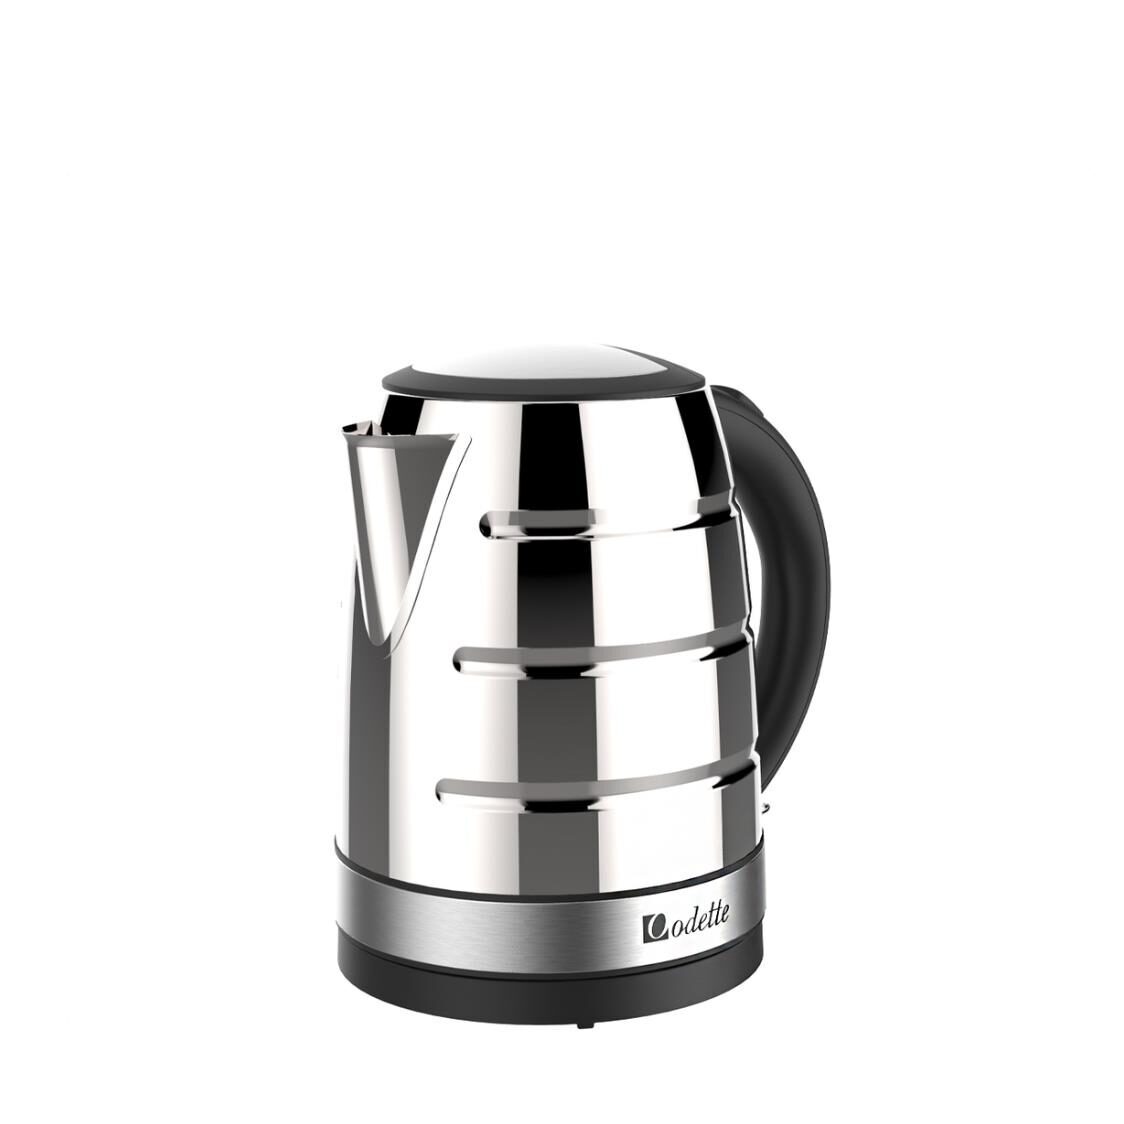 Odette 17L Electric Kettle Polished Stainless Steel WK8330LL01